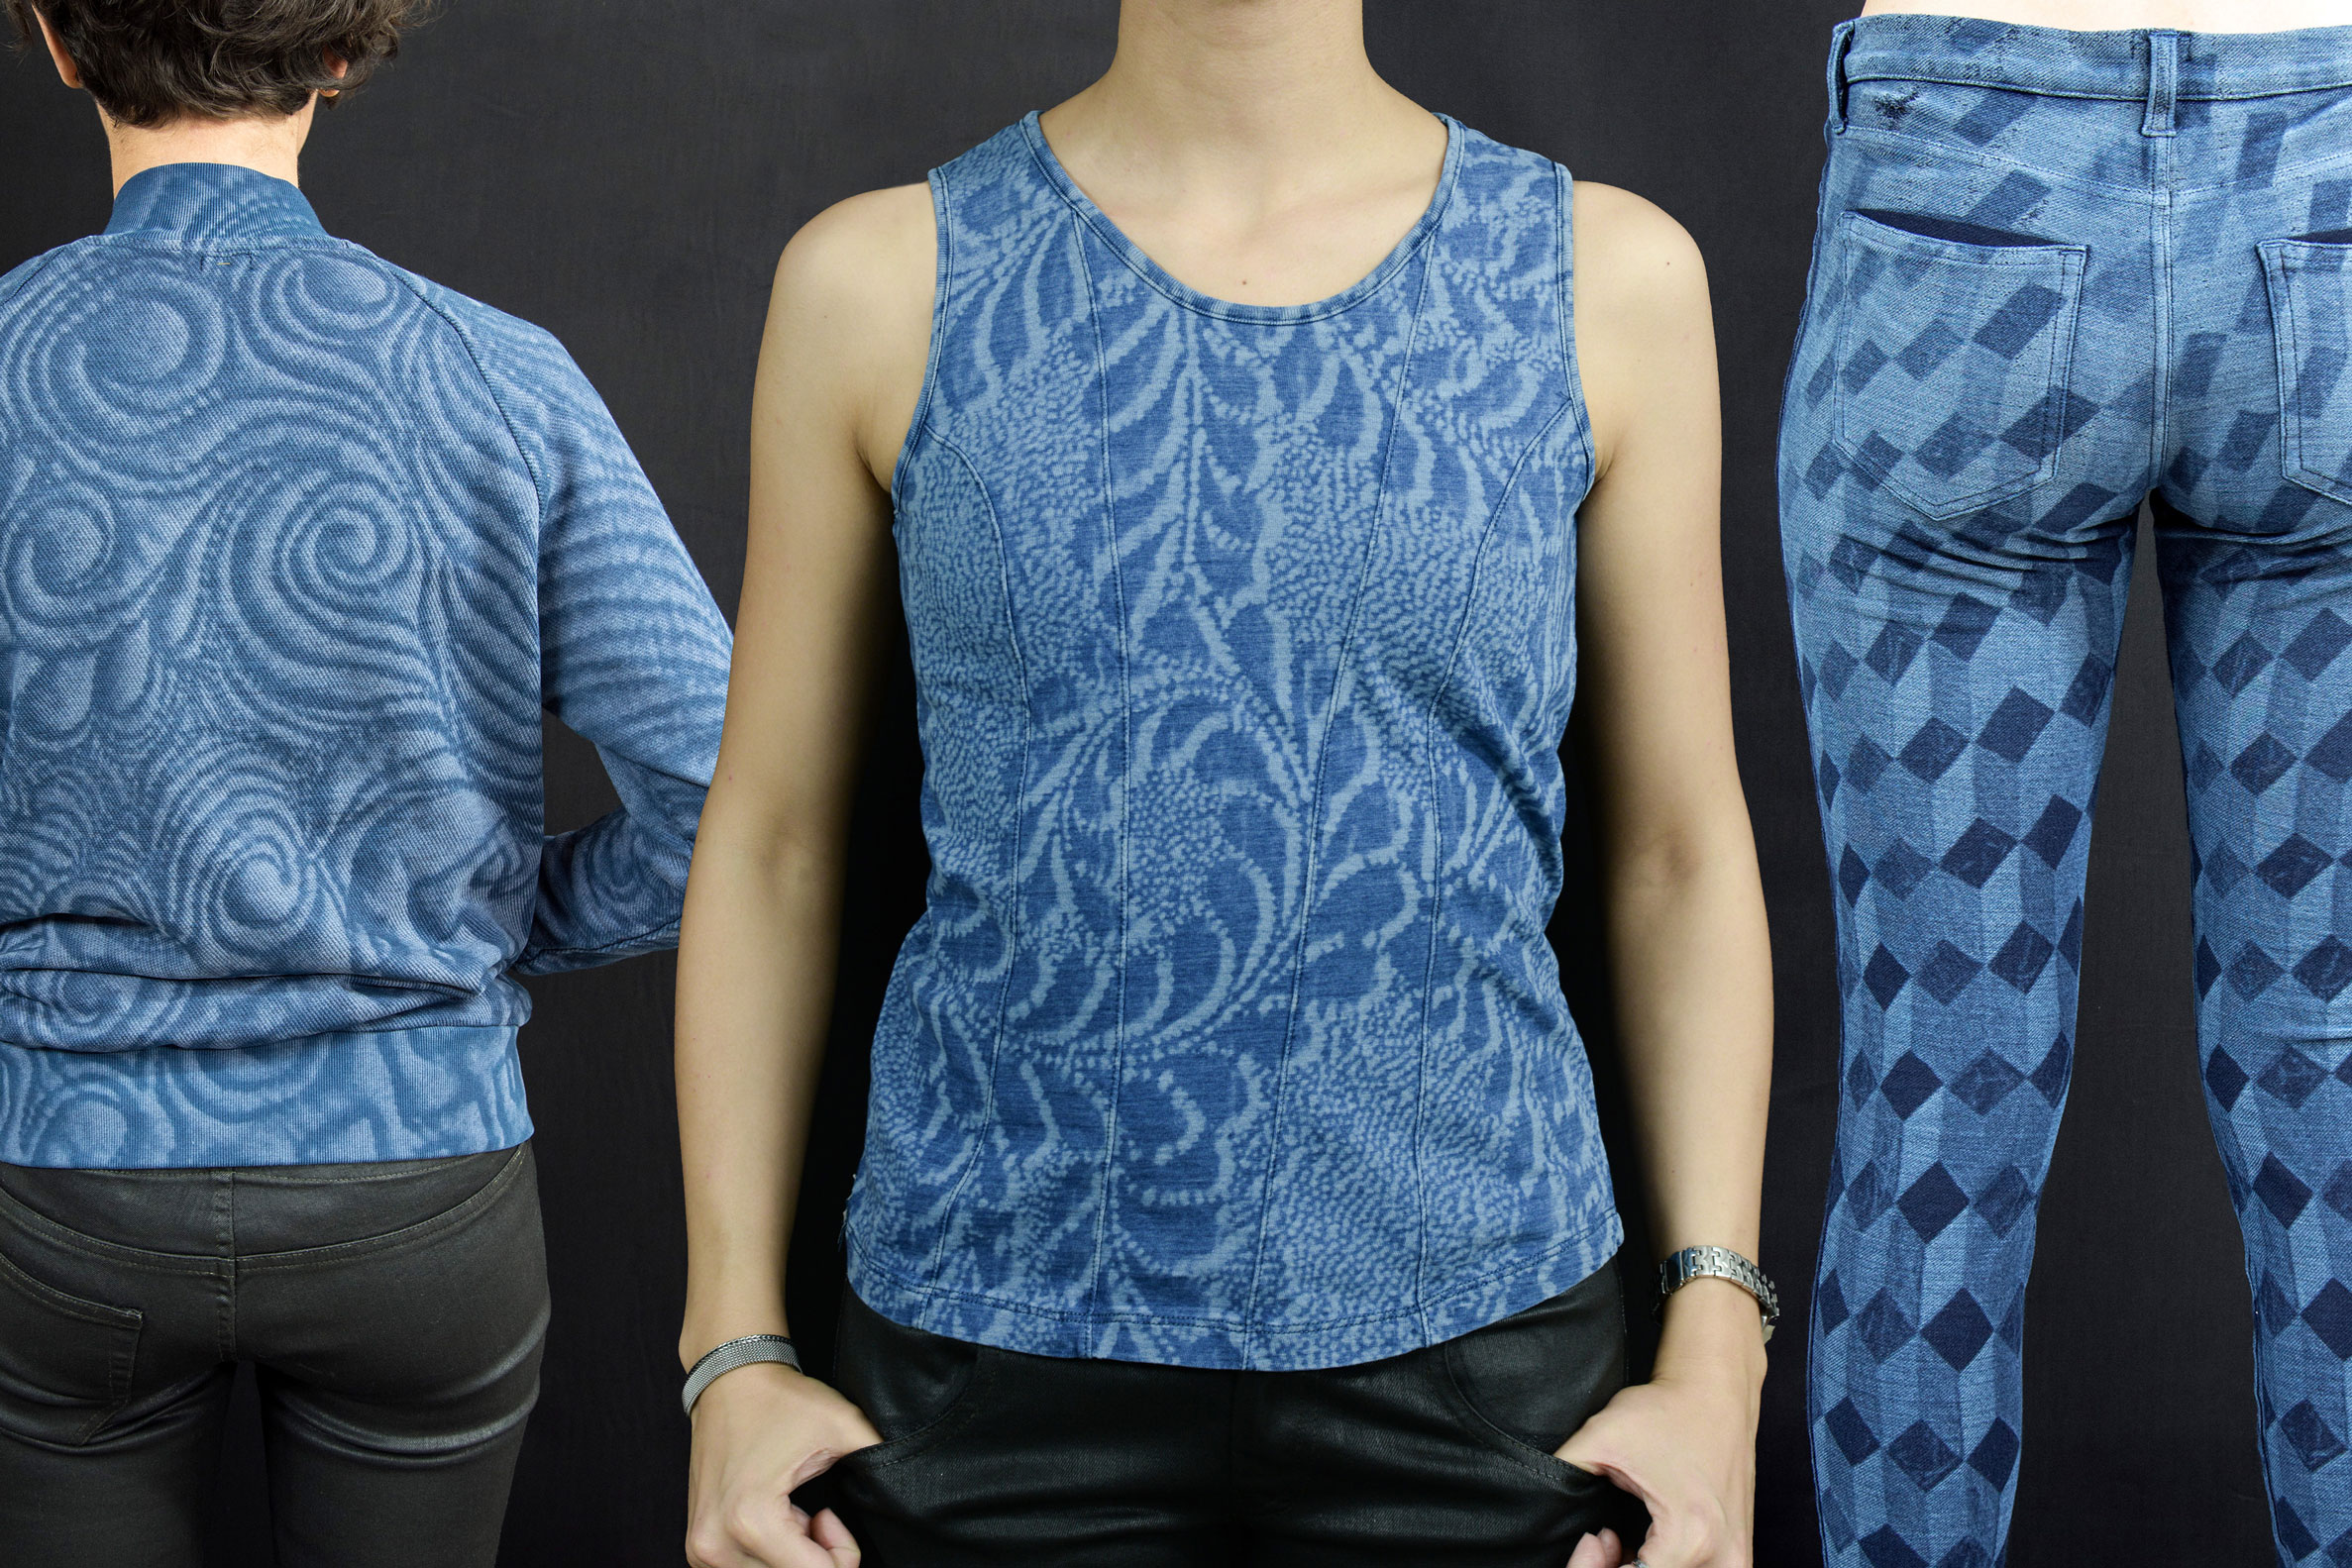 Knitwear design. Outfits designed by Meidea for Jeans Knits Jeanologia's collection